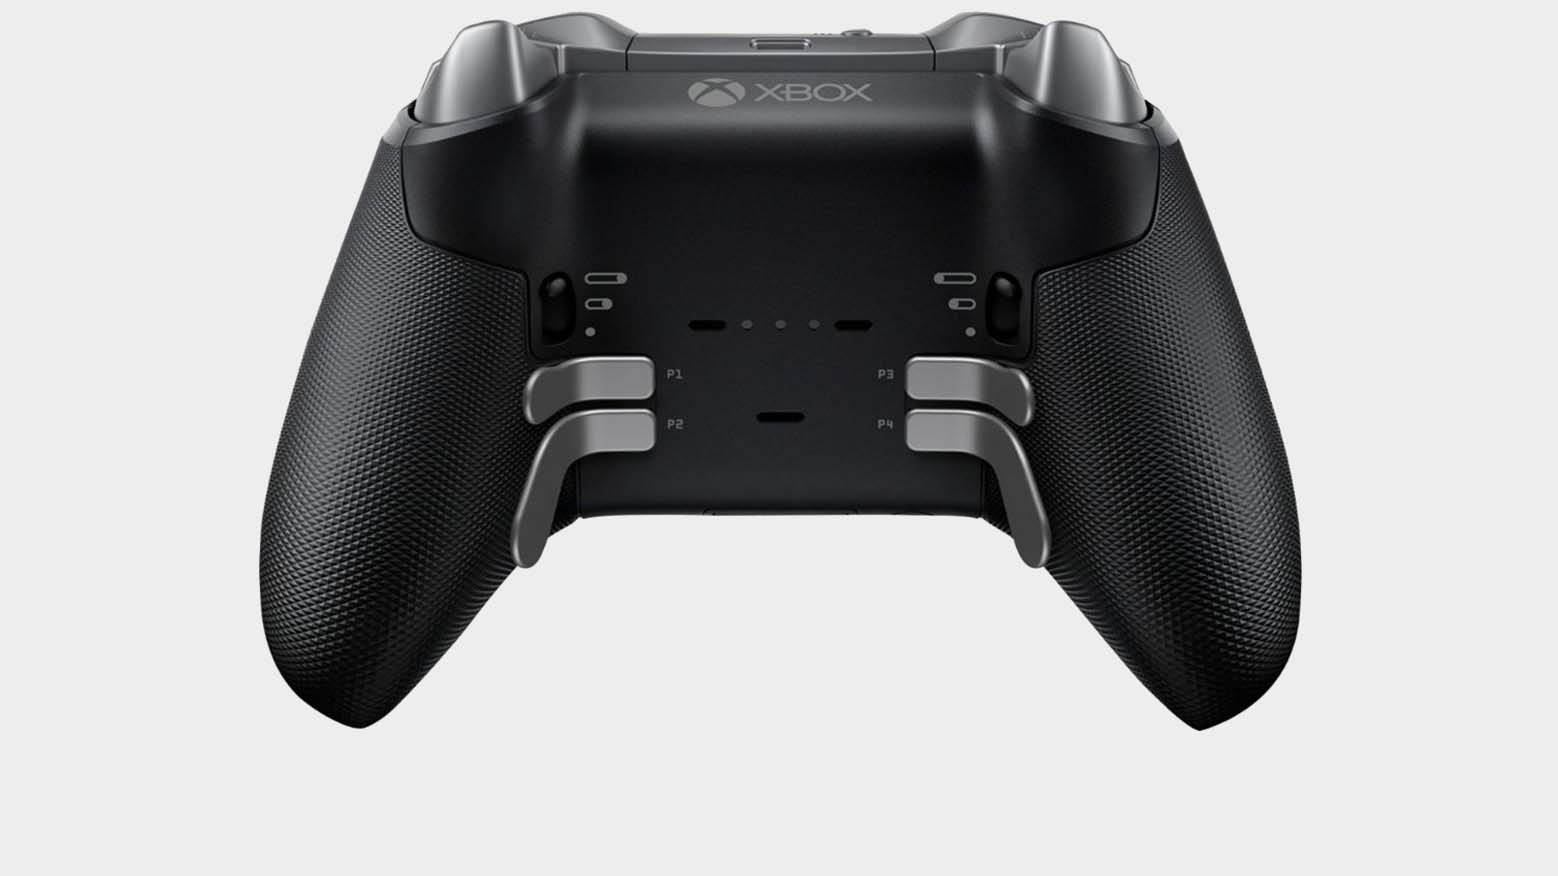 Xbox Elite Wireless Controller Series 2 from behind with the triggers on show on a grey background